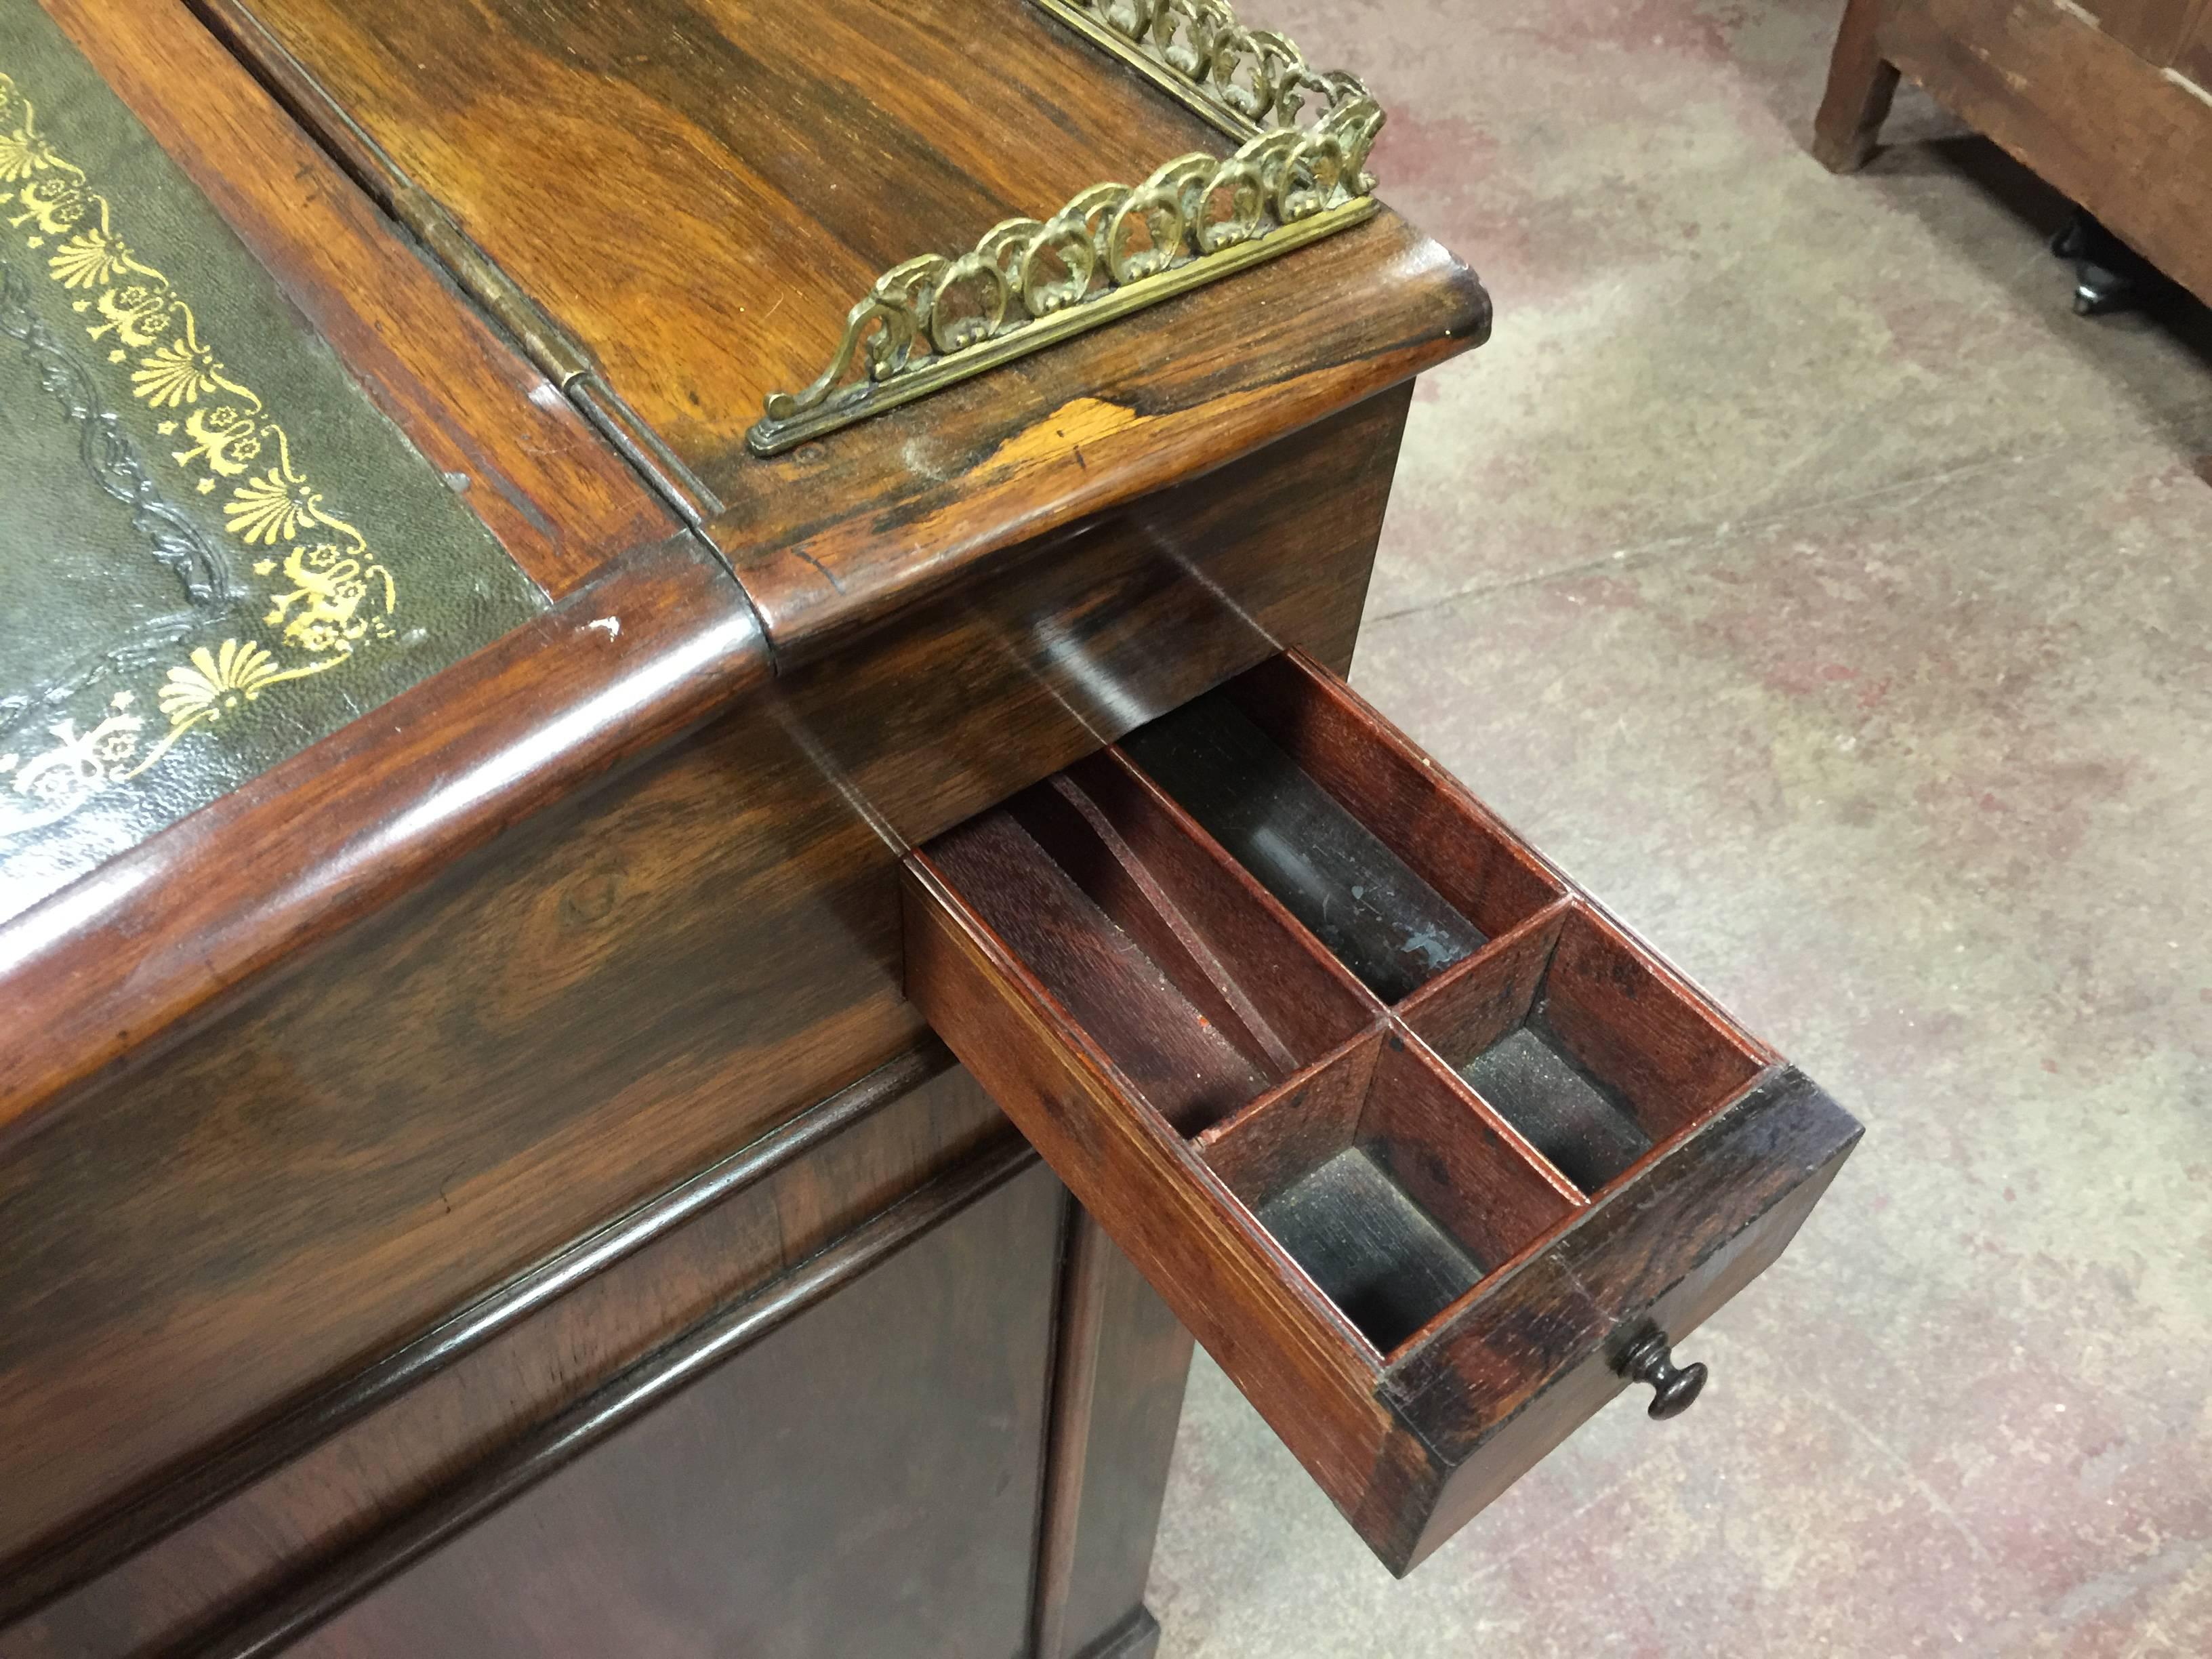 English Desk Mid-19th Century Davenport  with Original Leather Top